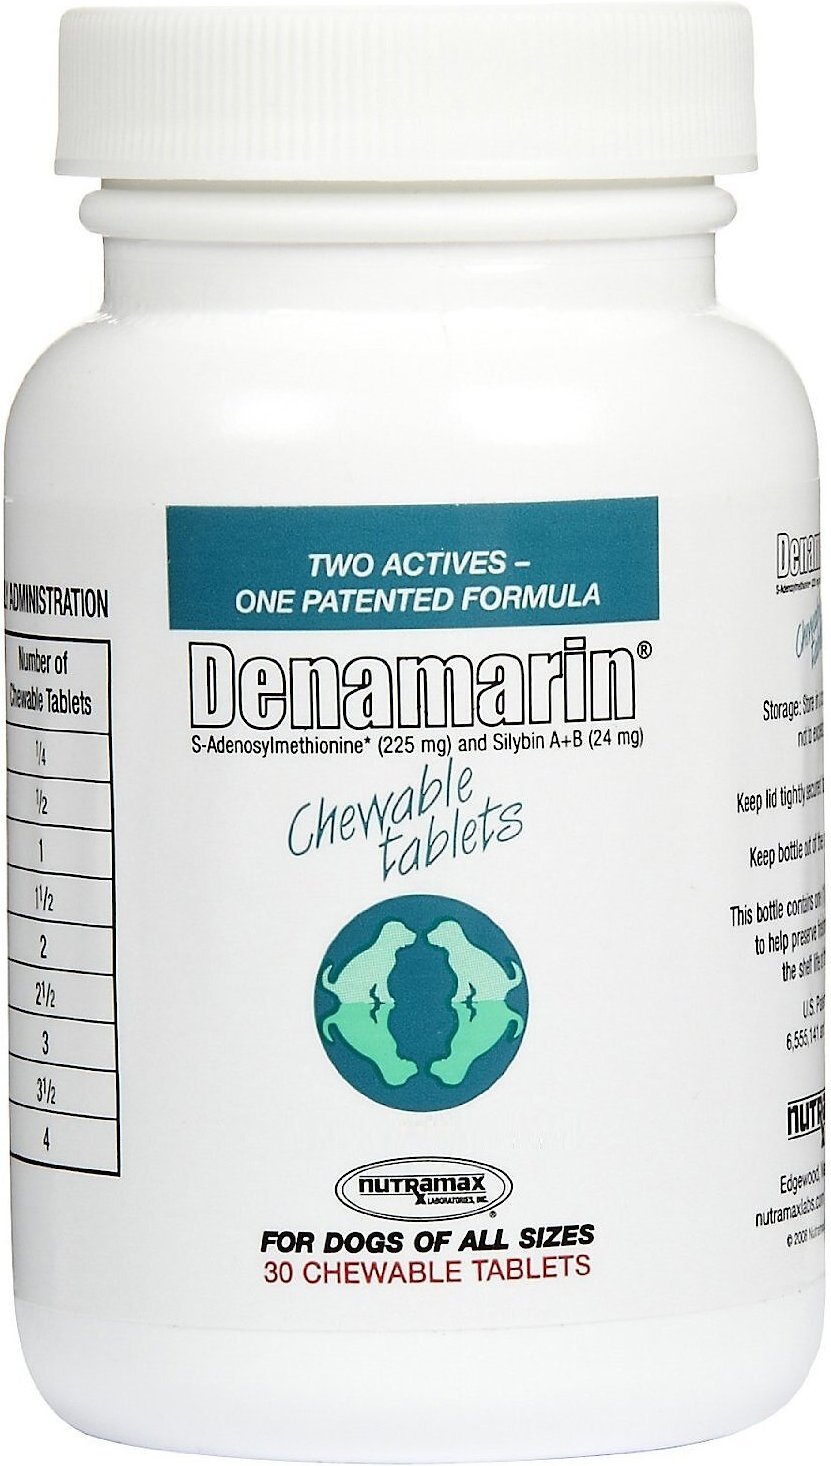 nutramax-denamarin-chewable-tablets-dog-supplement-free-shipping-chewy